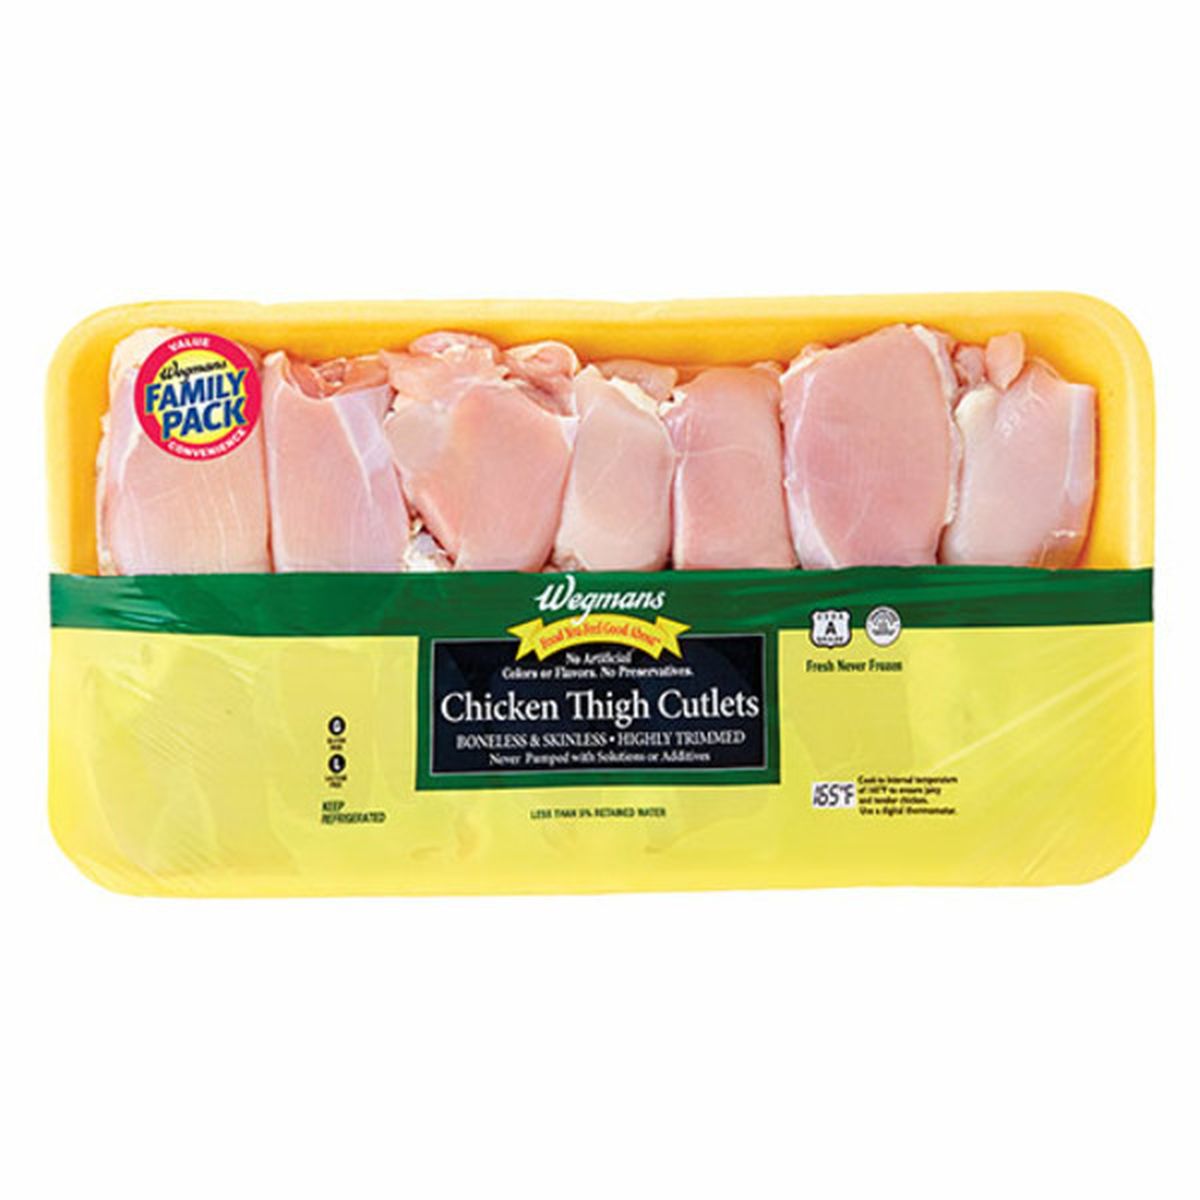 Calories in Wegmans Boneless & Skinless Chicken Thighs, Highly Trimmed, FAMILY PACK